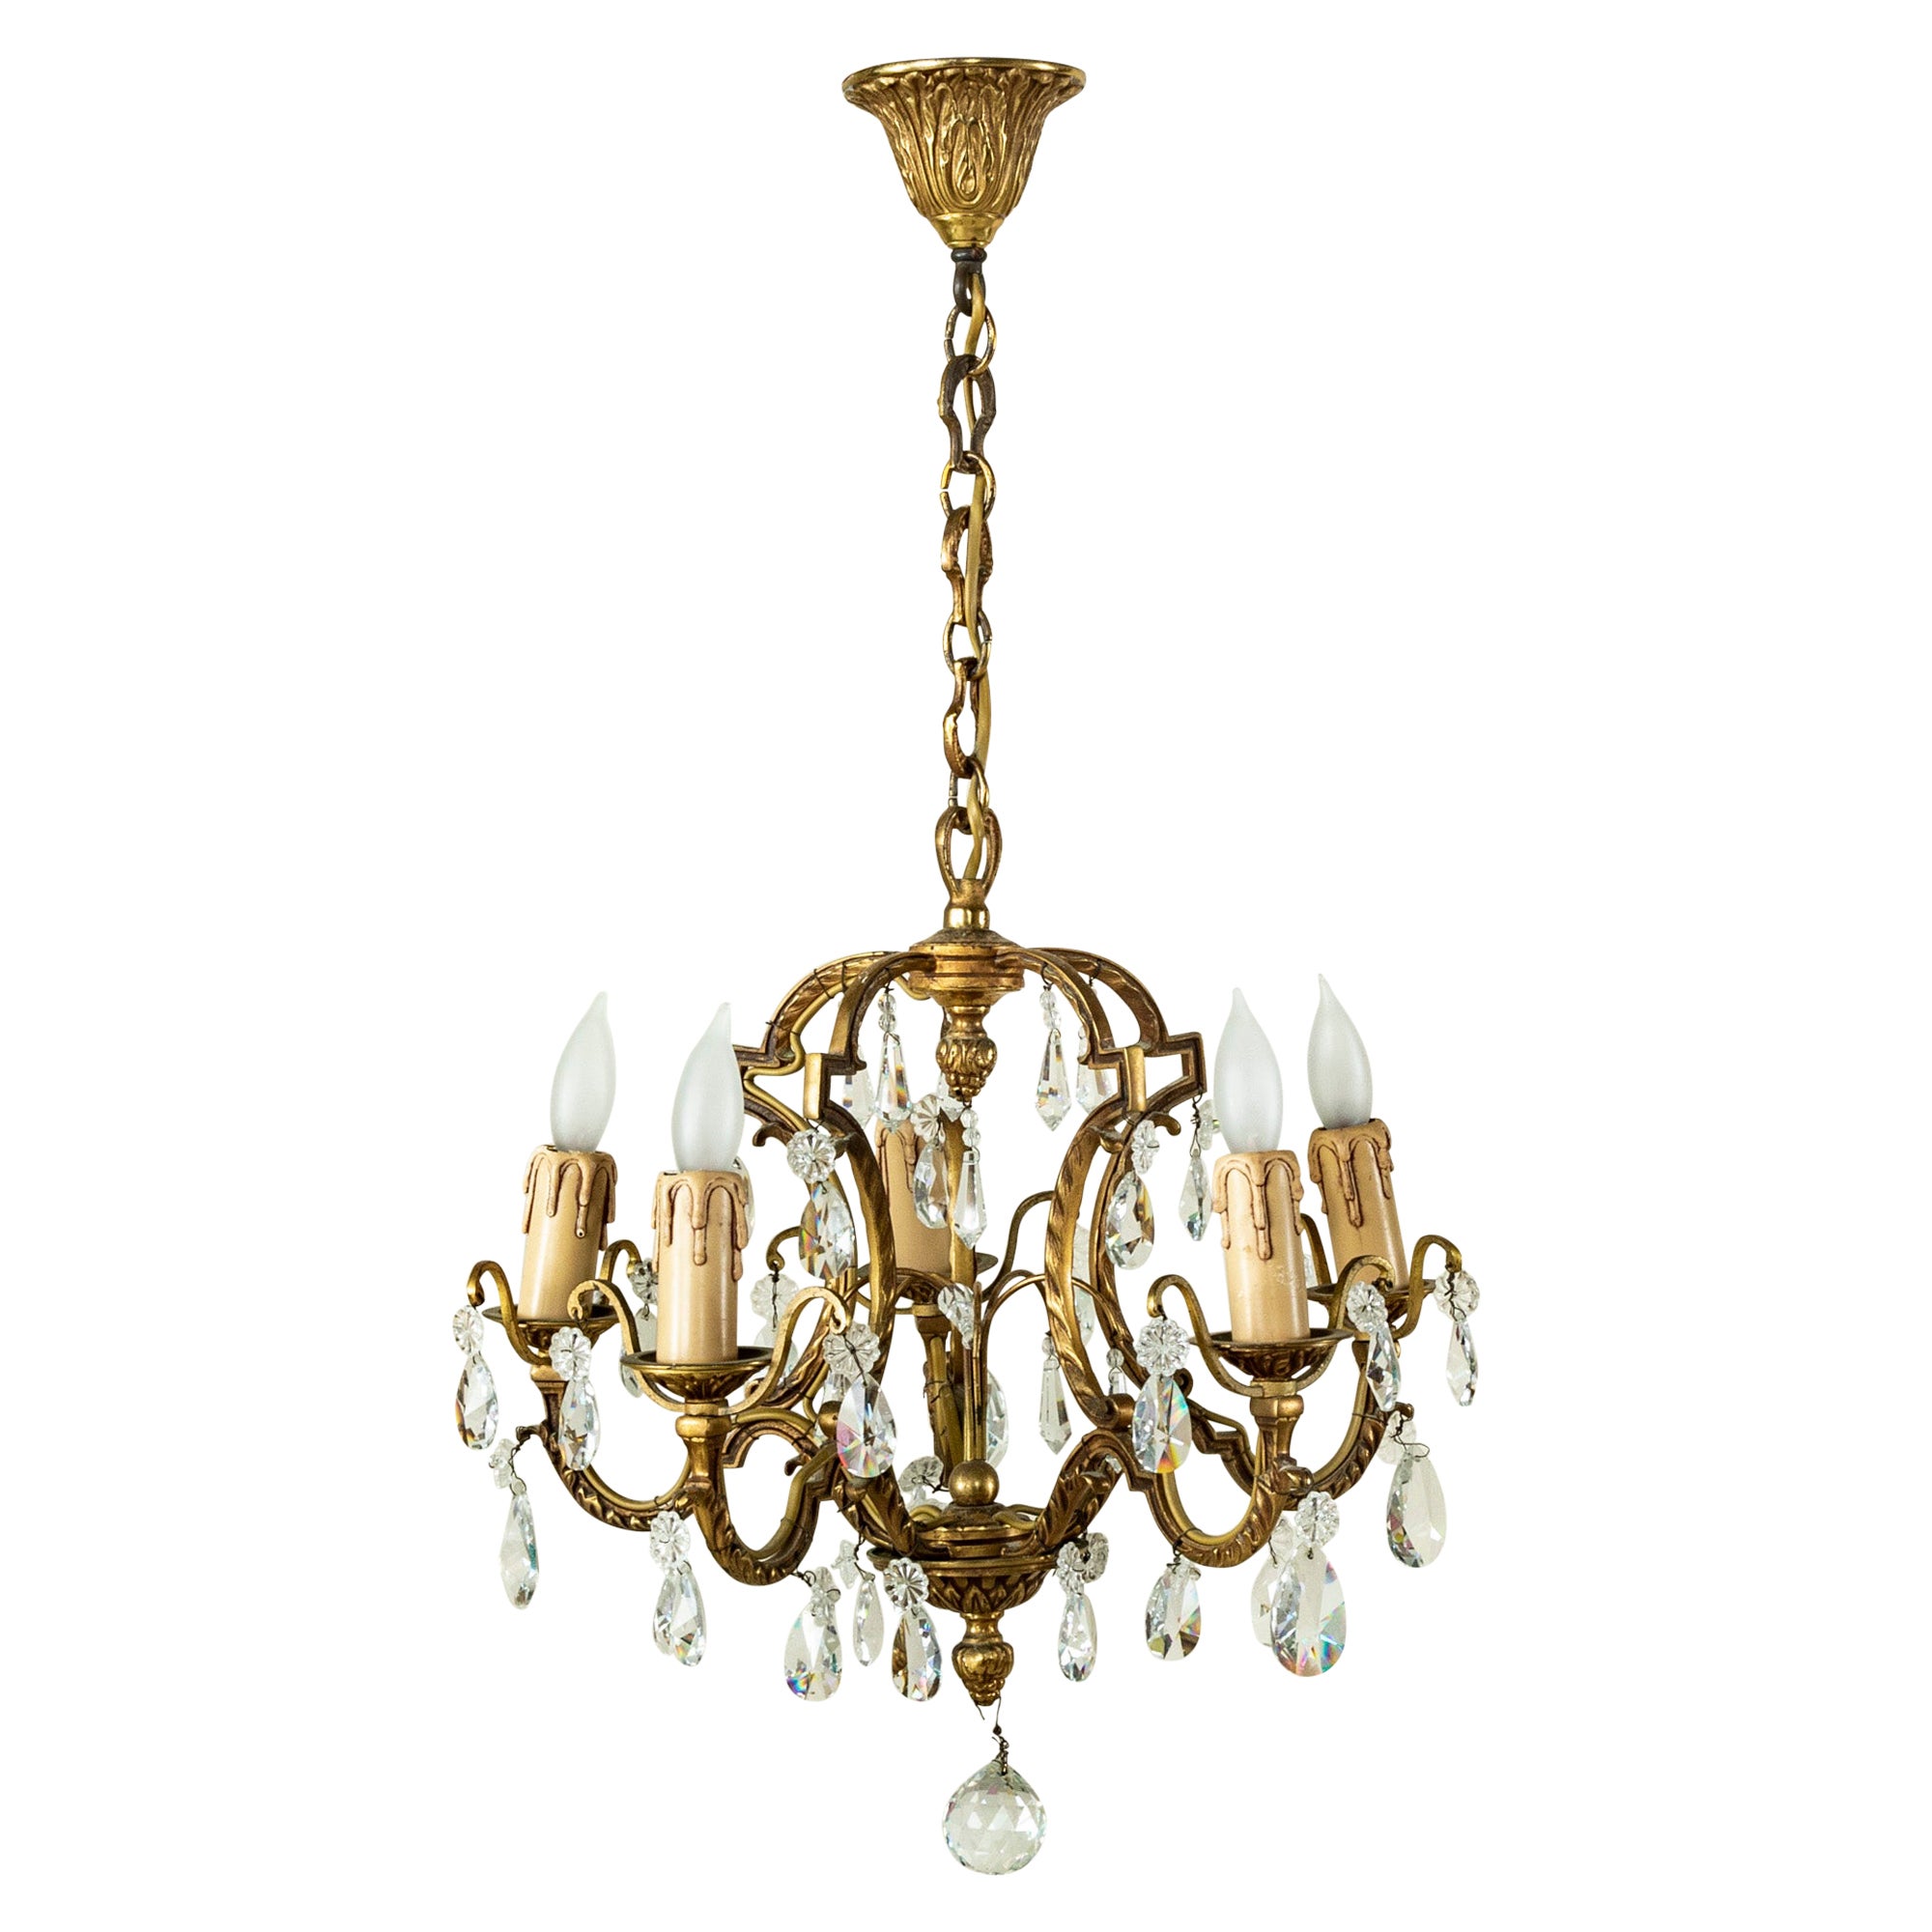 Mid-20th Century French Bronze and Strass Crystal Chandelier For Sale